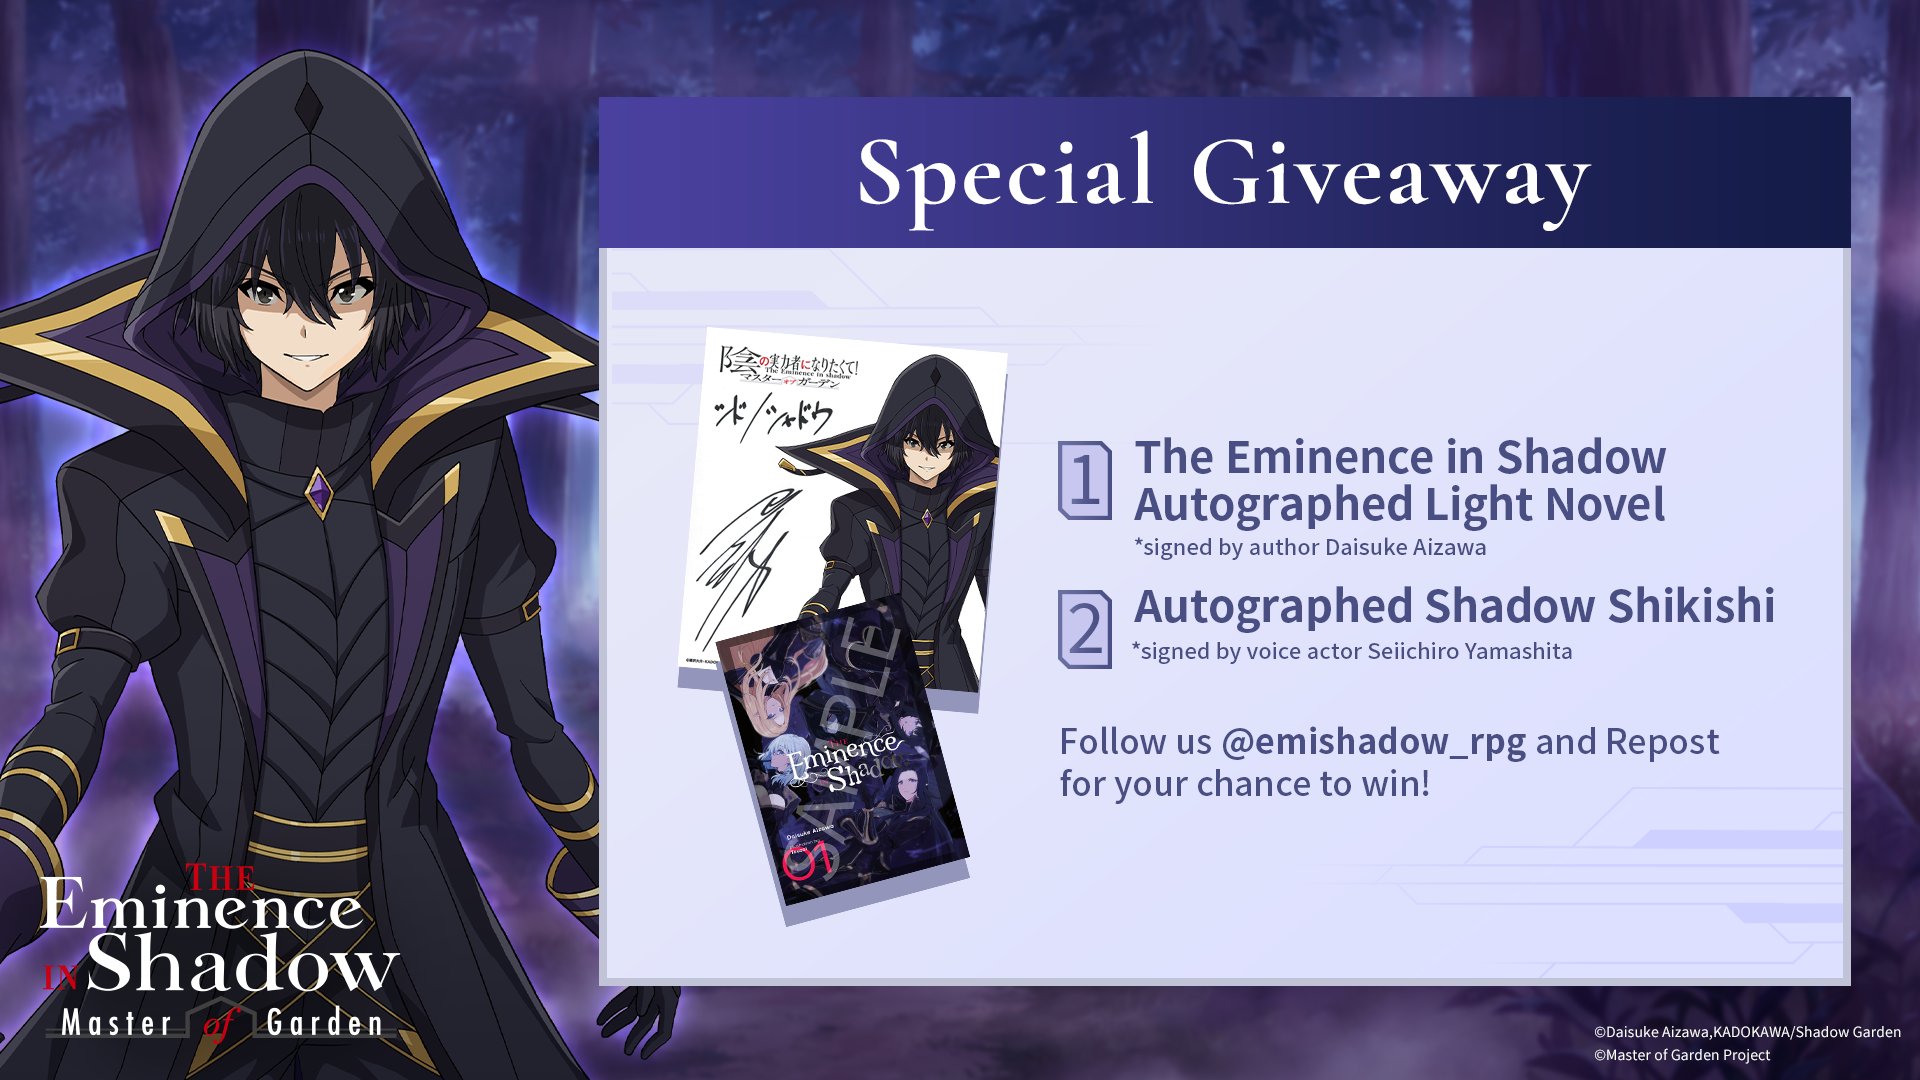 Crunchyroll Games - Any aspiring Shadow Garden members here? 🔥 We're  giving away an autograph from Cid's voice actor Seiichiro Yamashita to  celebrate the announcement of The Eminence in Shadow: Master of